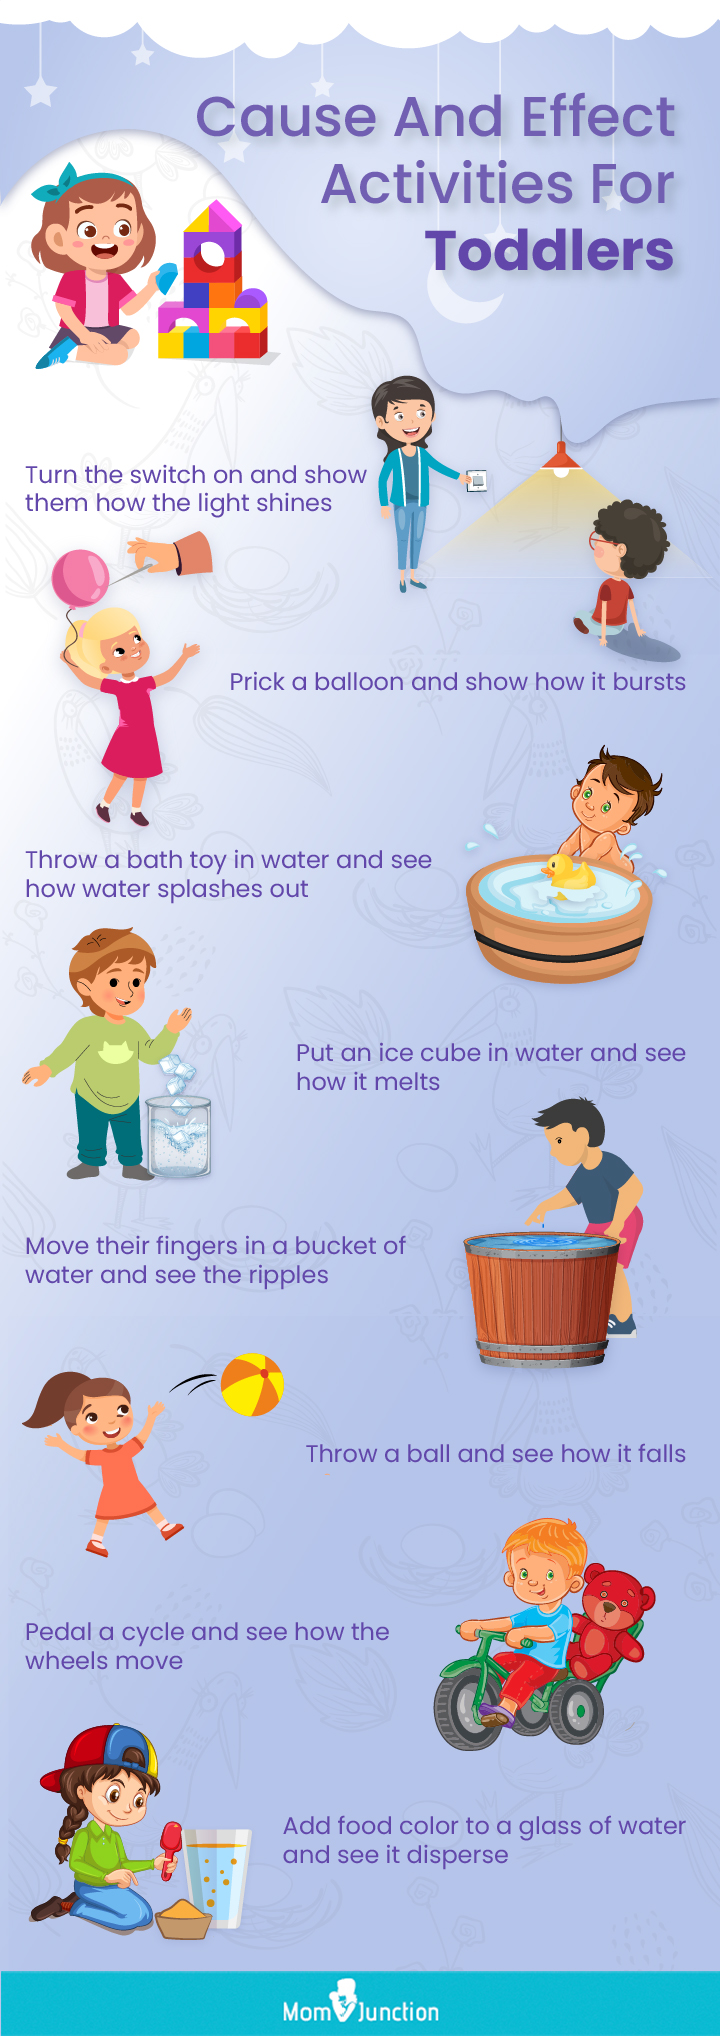 cause and effect activities for toddlers [infographic]